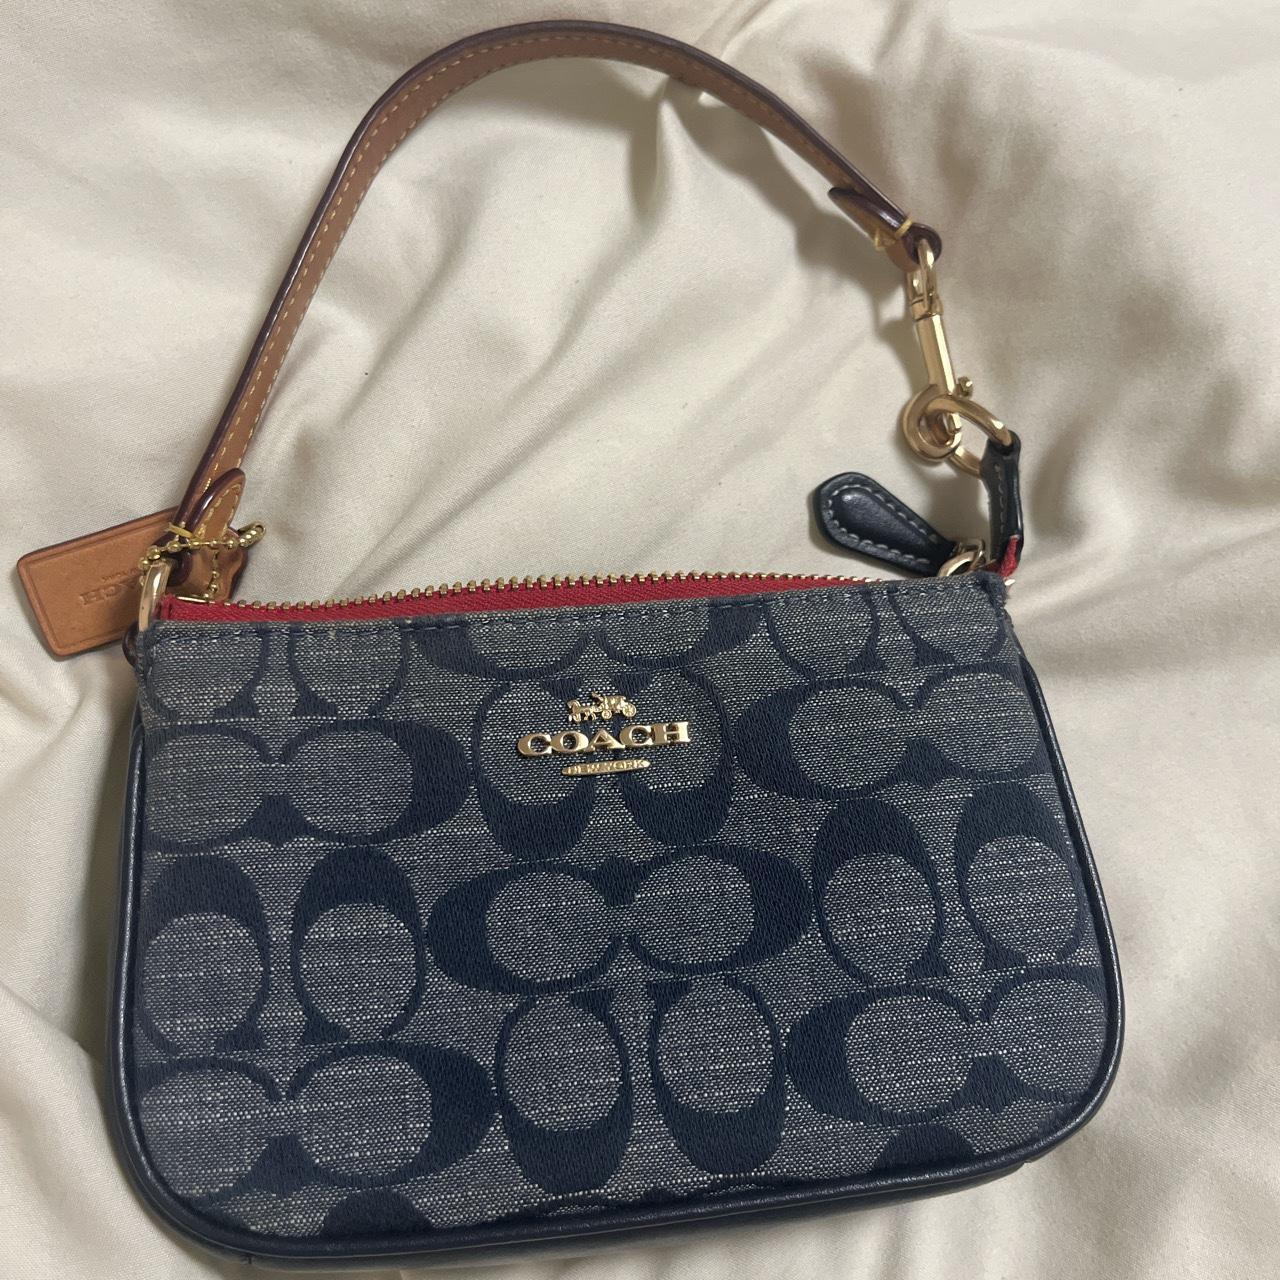 Coach leather lap top carrier/holder/case. Has been - Depop